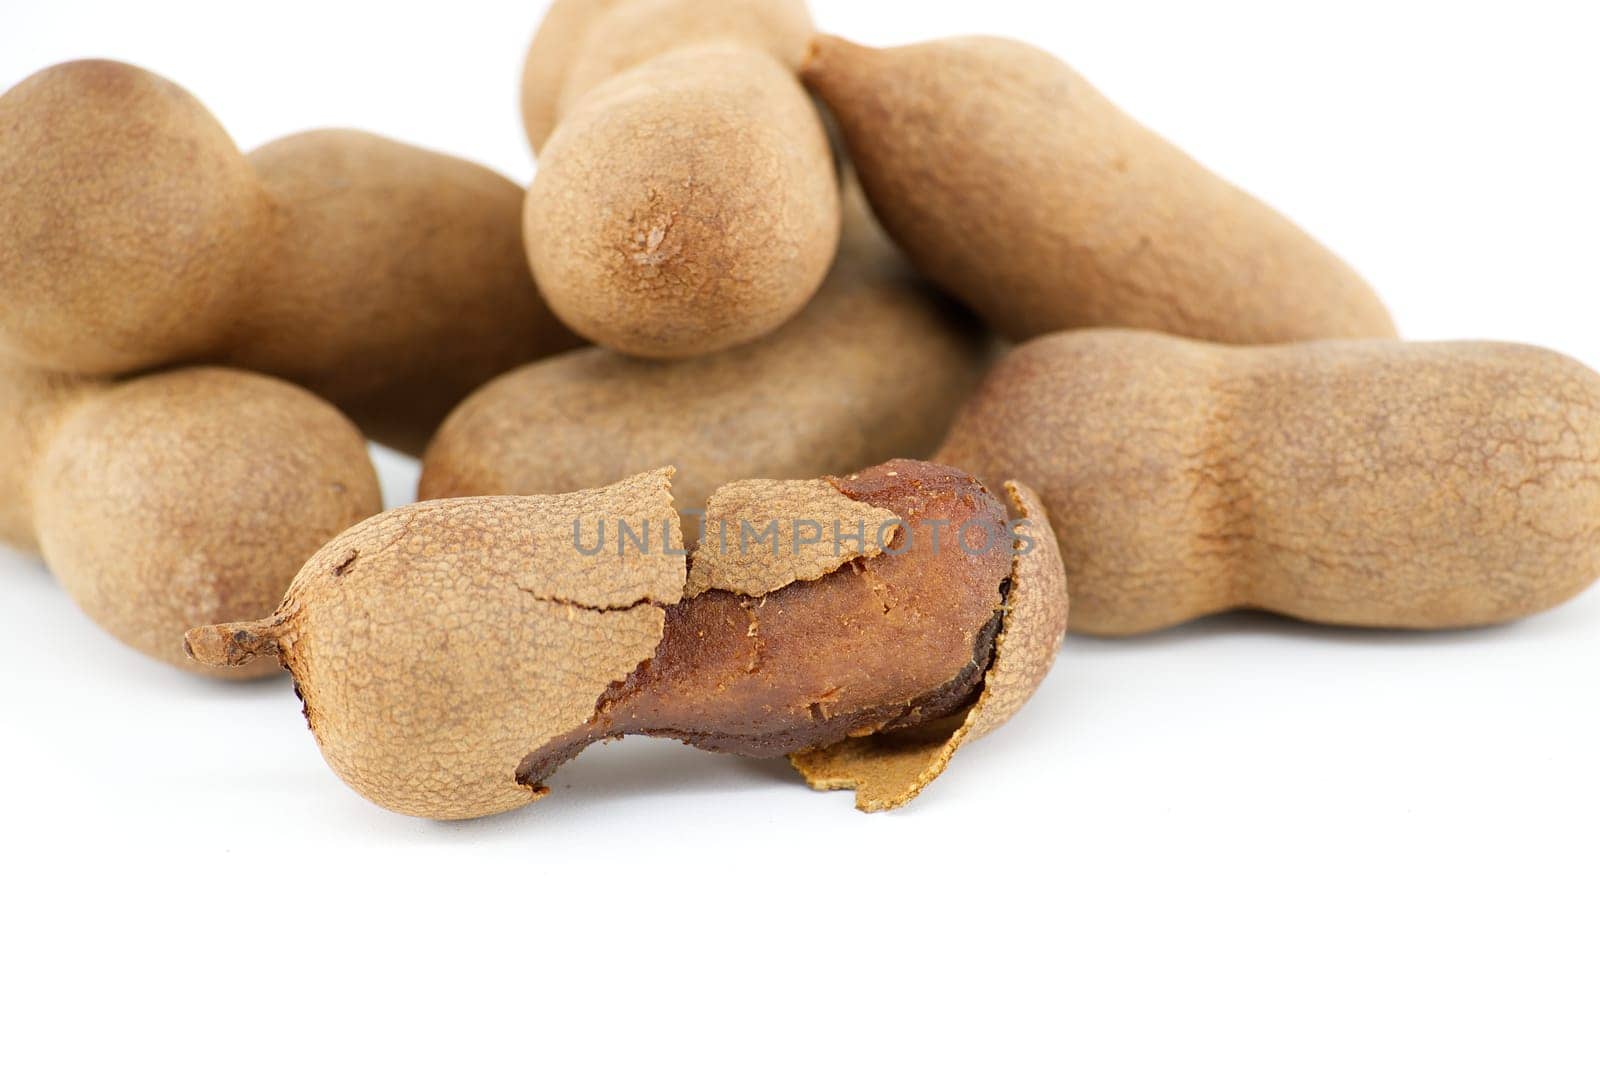 Tamarind whole and cracked open on white background by NetPix